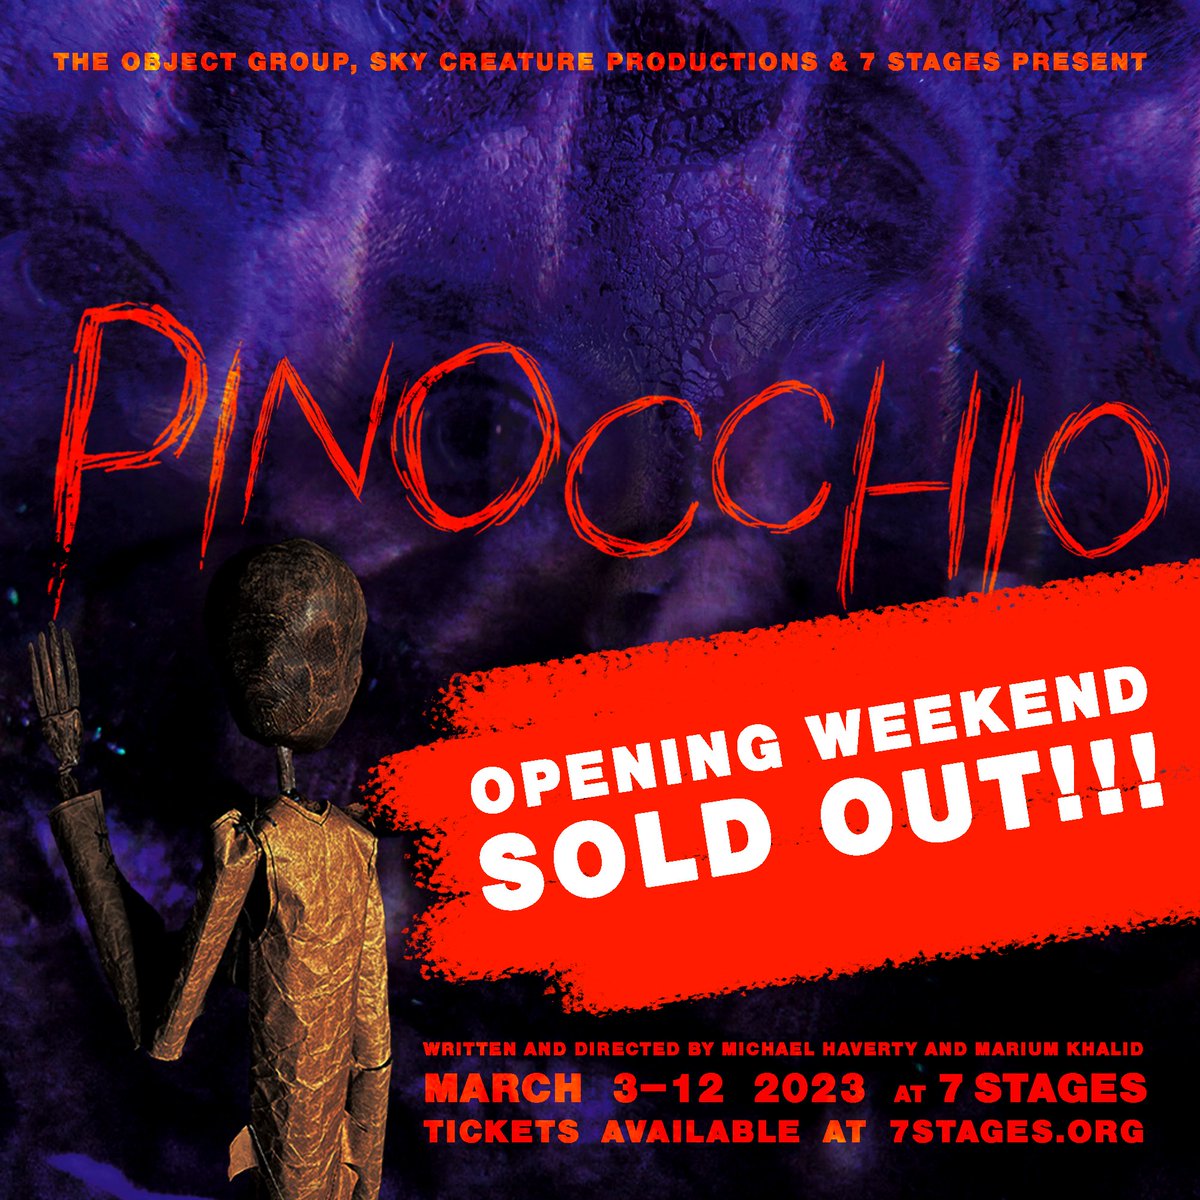 Pinocchio performances this weekend are officially SOLD OUT! As of now, there are still tickets for our Monday Industry Night performance, preceded by a complimentary Art of Activism dialogue. Tix for next weekend are going fast! #Pinocchio #7Stages #l5patl #l5p #atlantatheatre